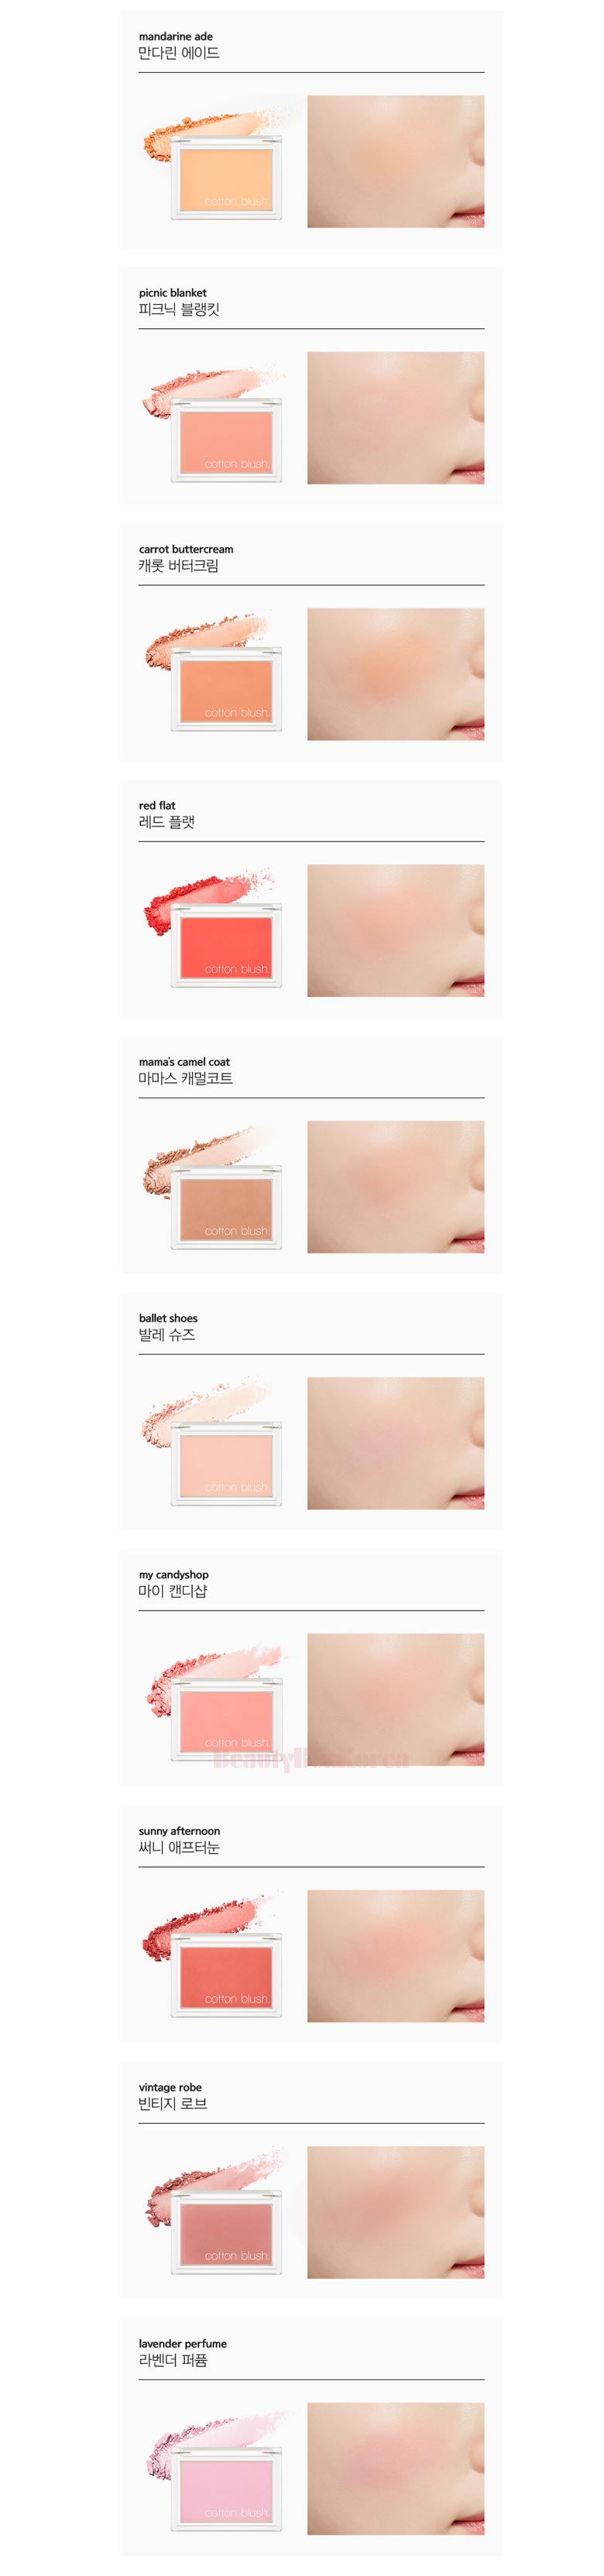 MISSHA Cotton Blush 4g | Best Price and Fast Shipping from Beauty Box Korea